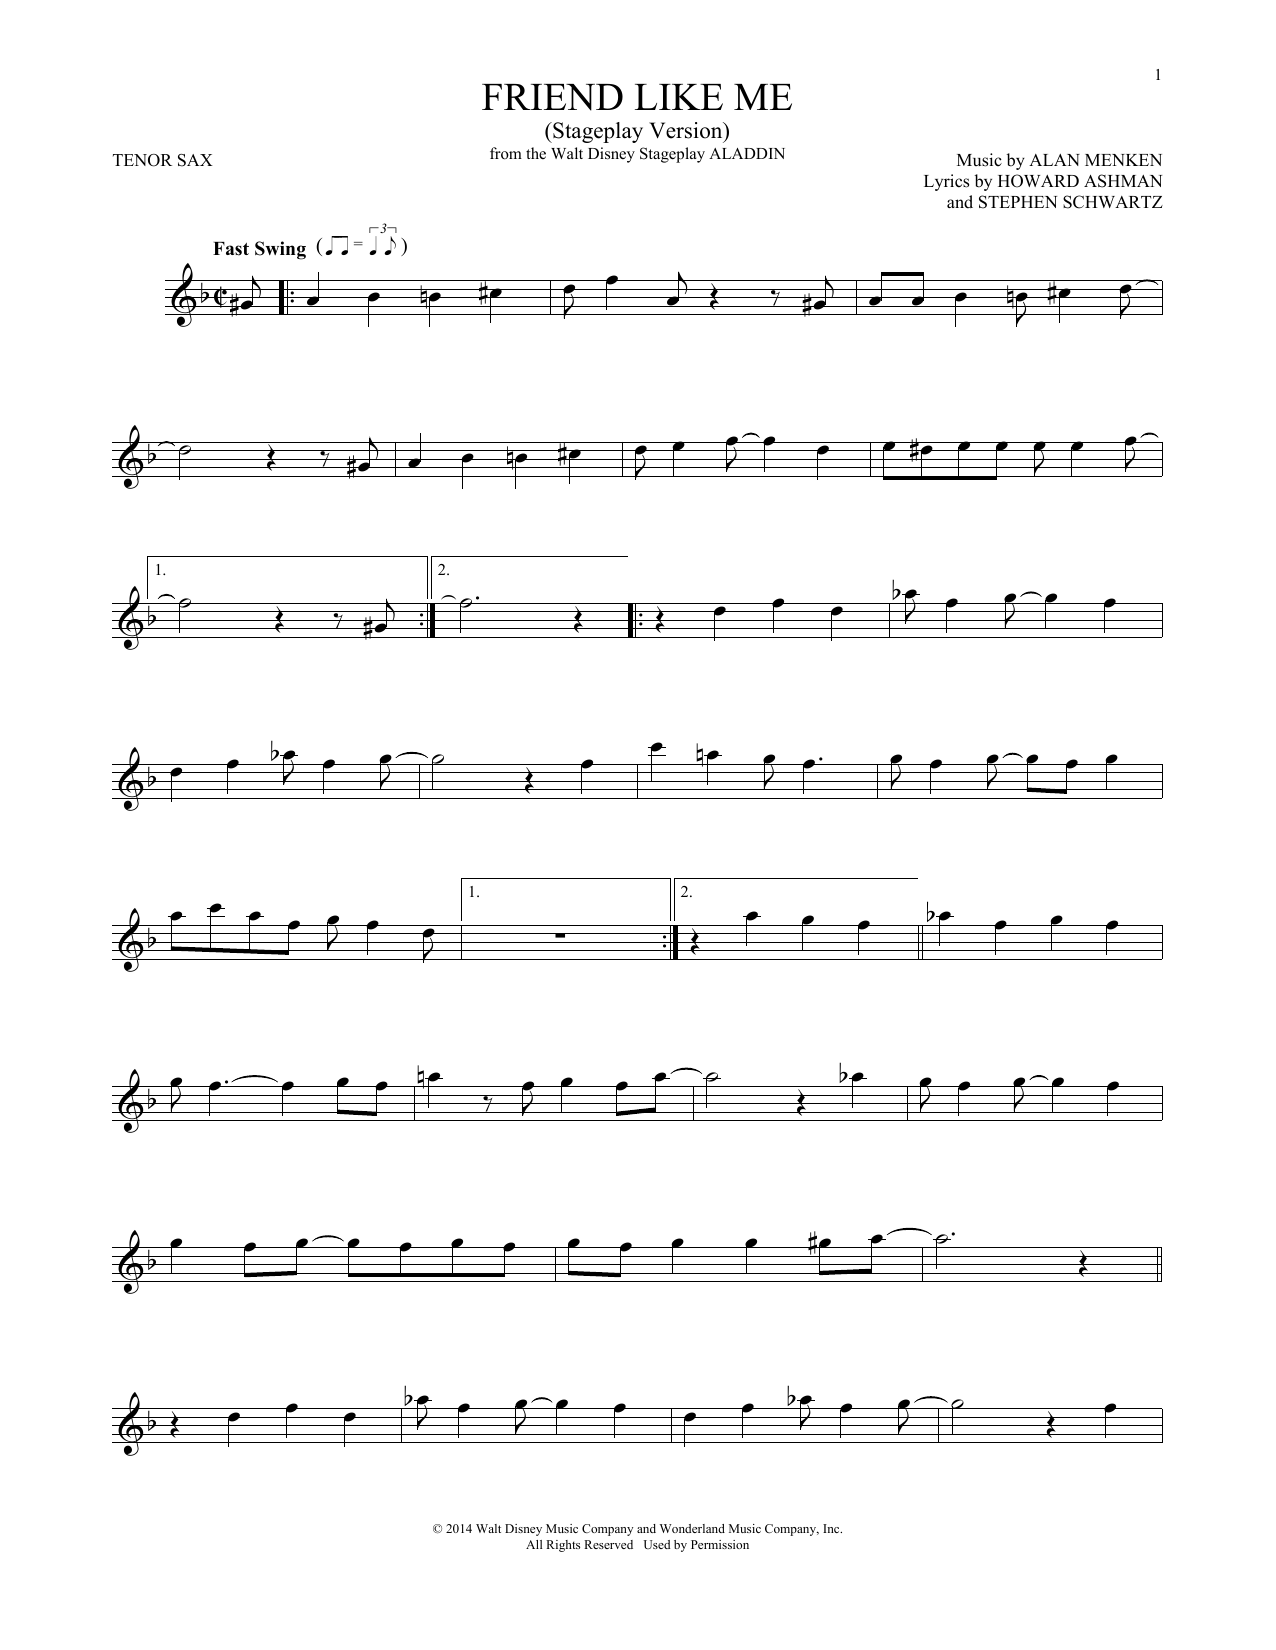 Alan Menken Friend Like Me (from Aladdin) (Stageplay Version) sheet music notes and chords. Download Printable PDF.